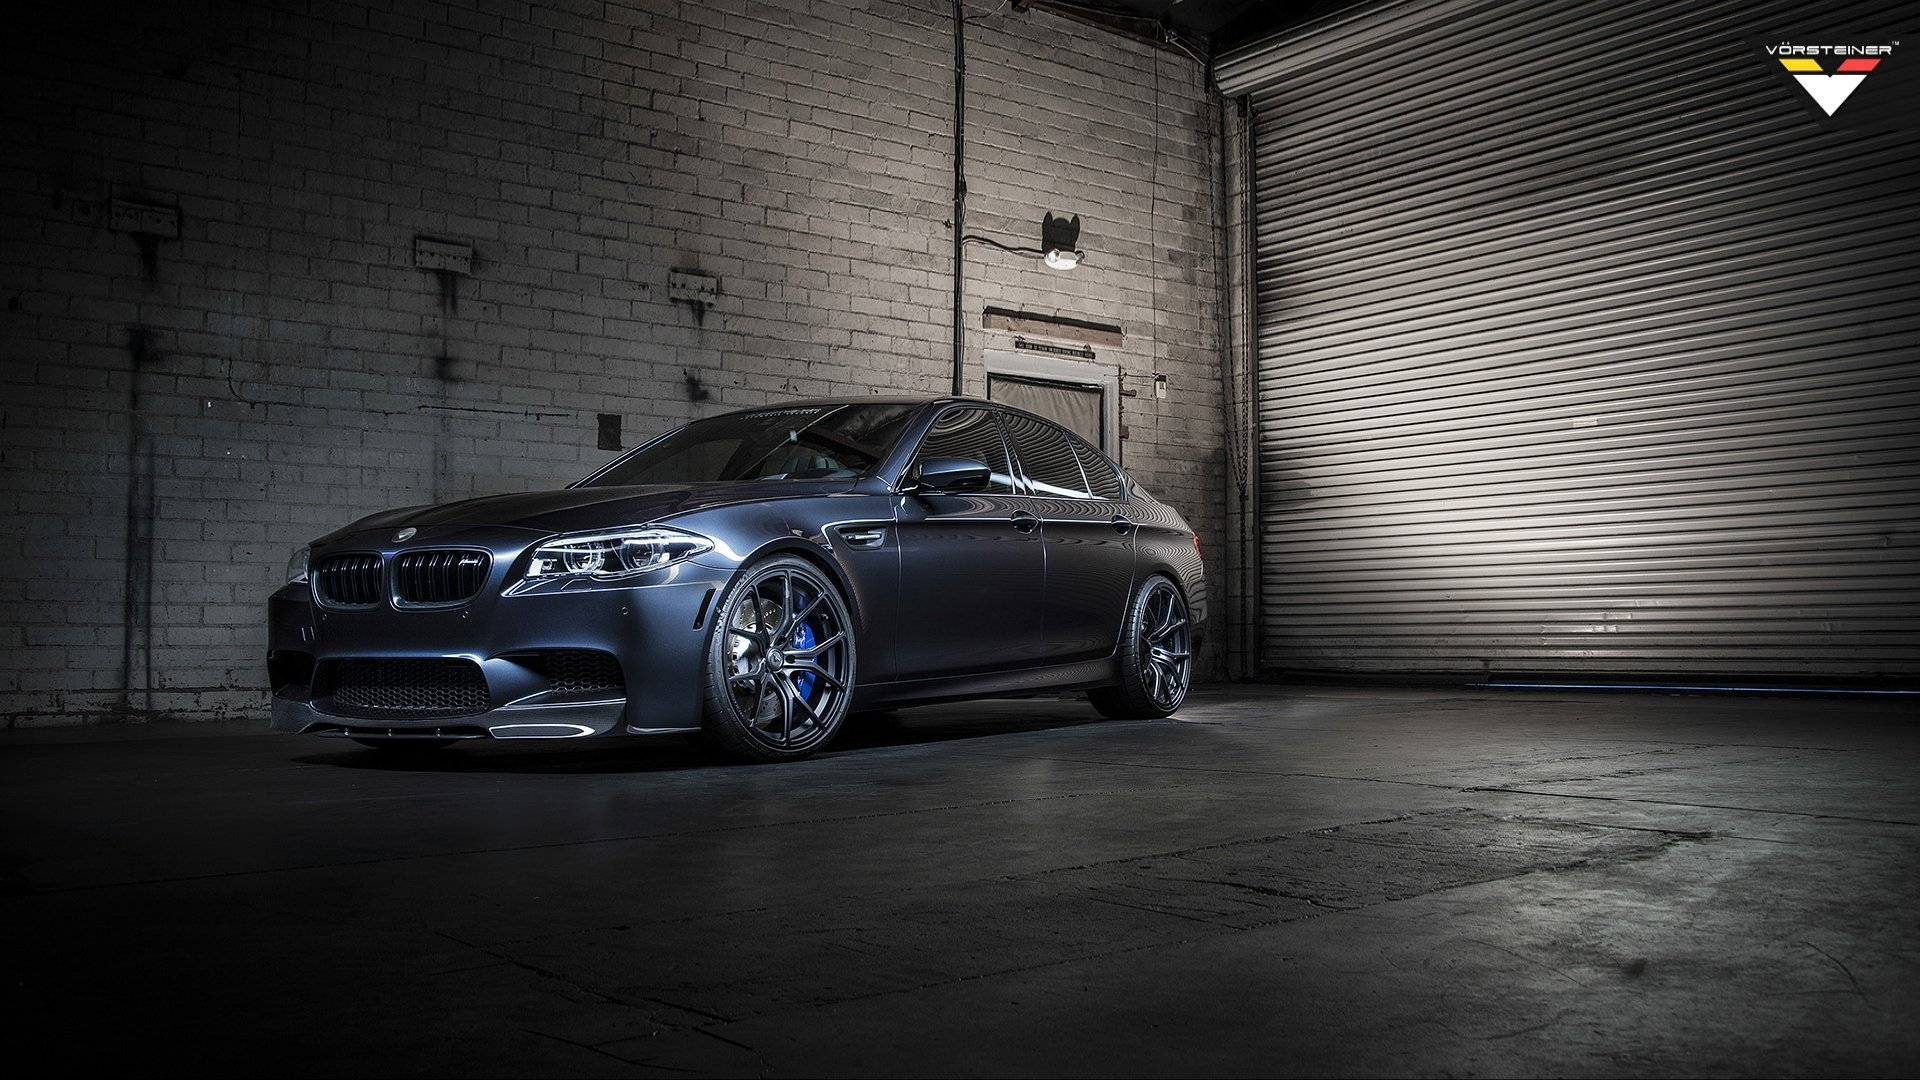 Bmw car wallpaper with tuning in the garage - desktop wallpapers